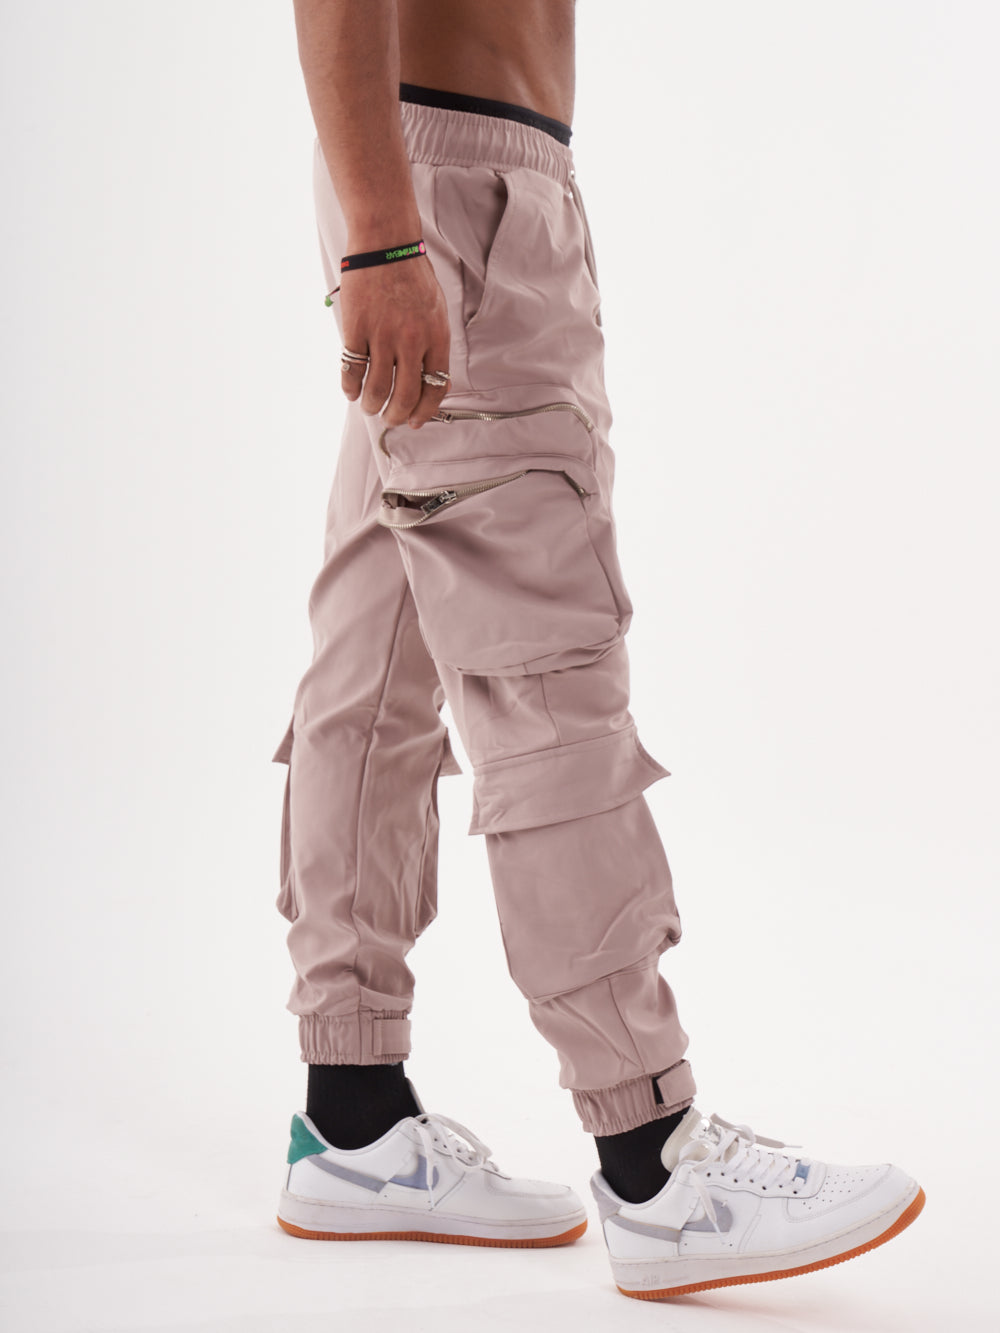 A man wearing Spunk Joggers in mauve with cargo pockets and white sneakers.